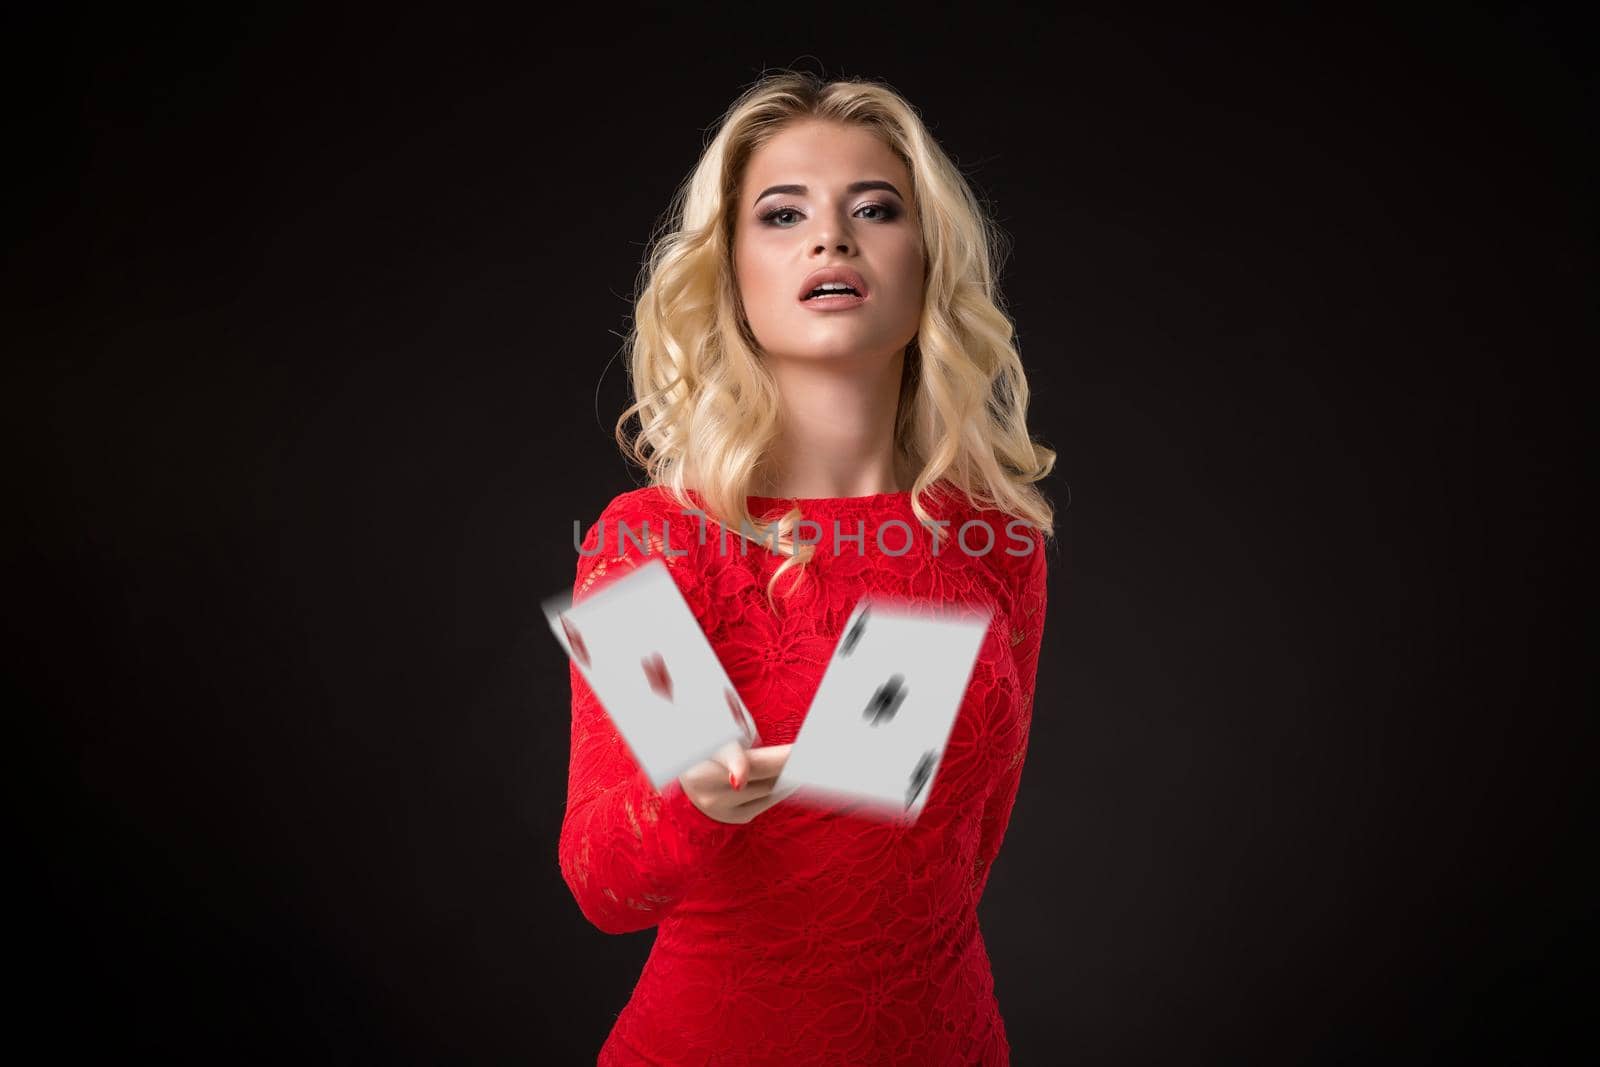 Young beautiful emotional woman throws cards on a black background in the studio. Poker by nazarovsergey